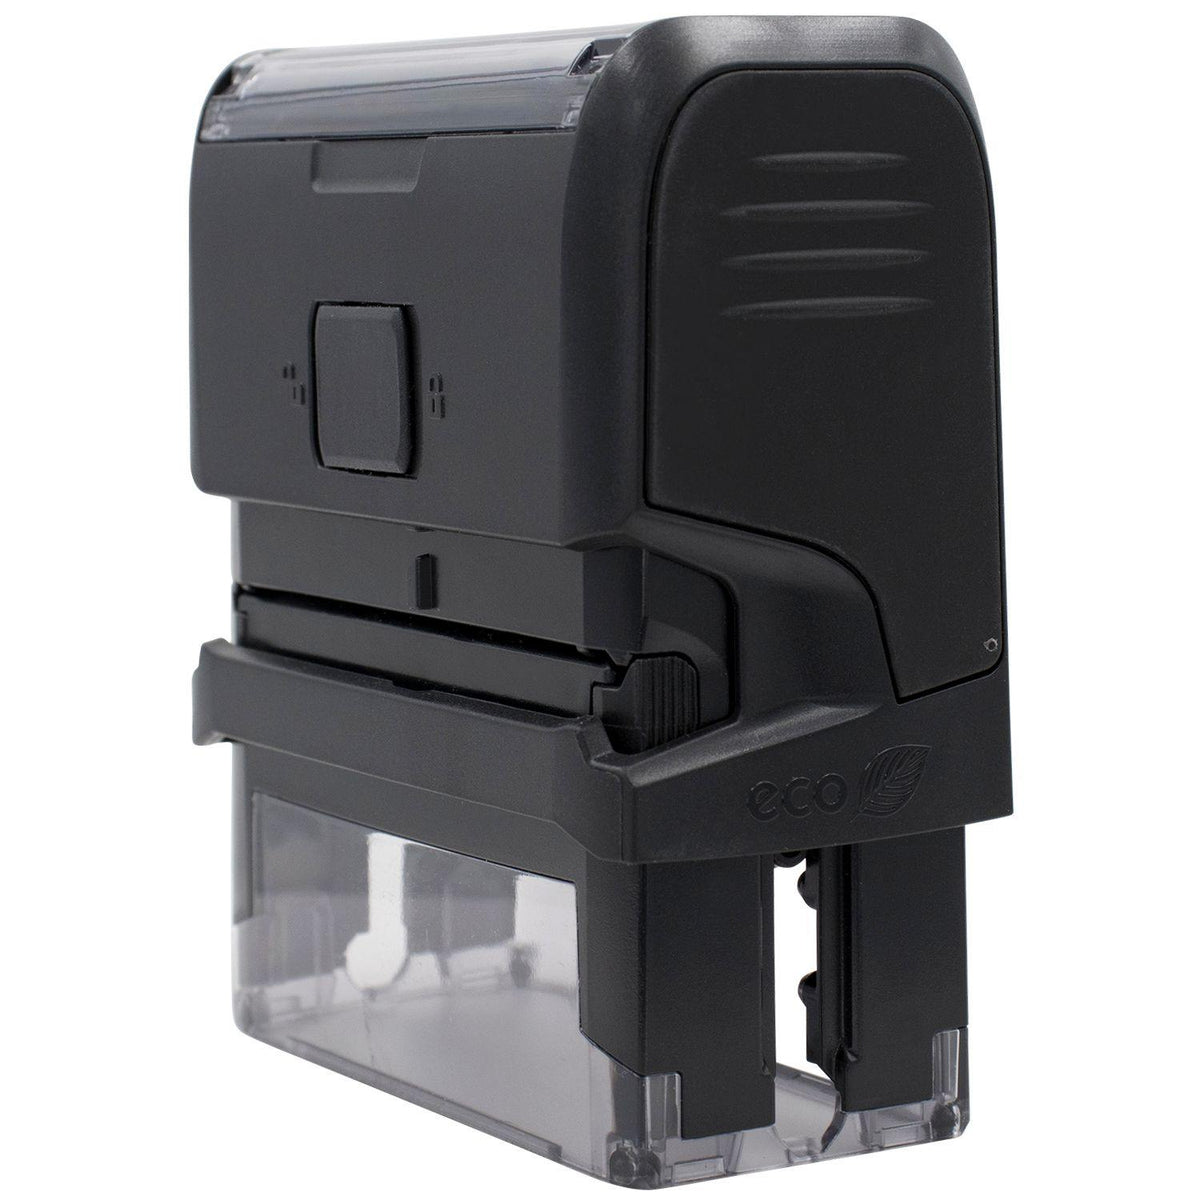 Side View of Large Self Inking Advance Directive Stamp at an Angle